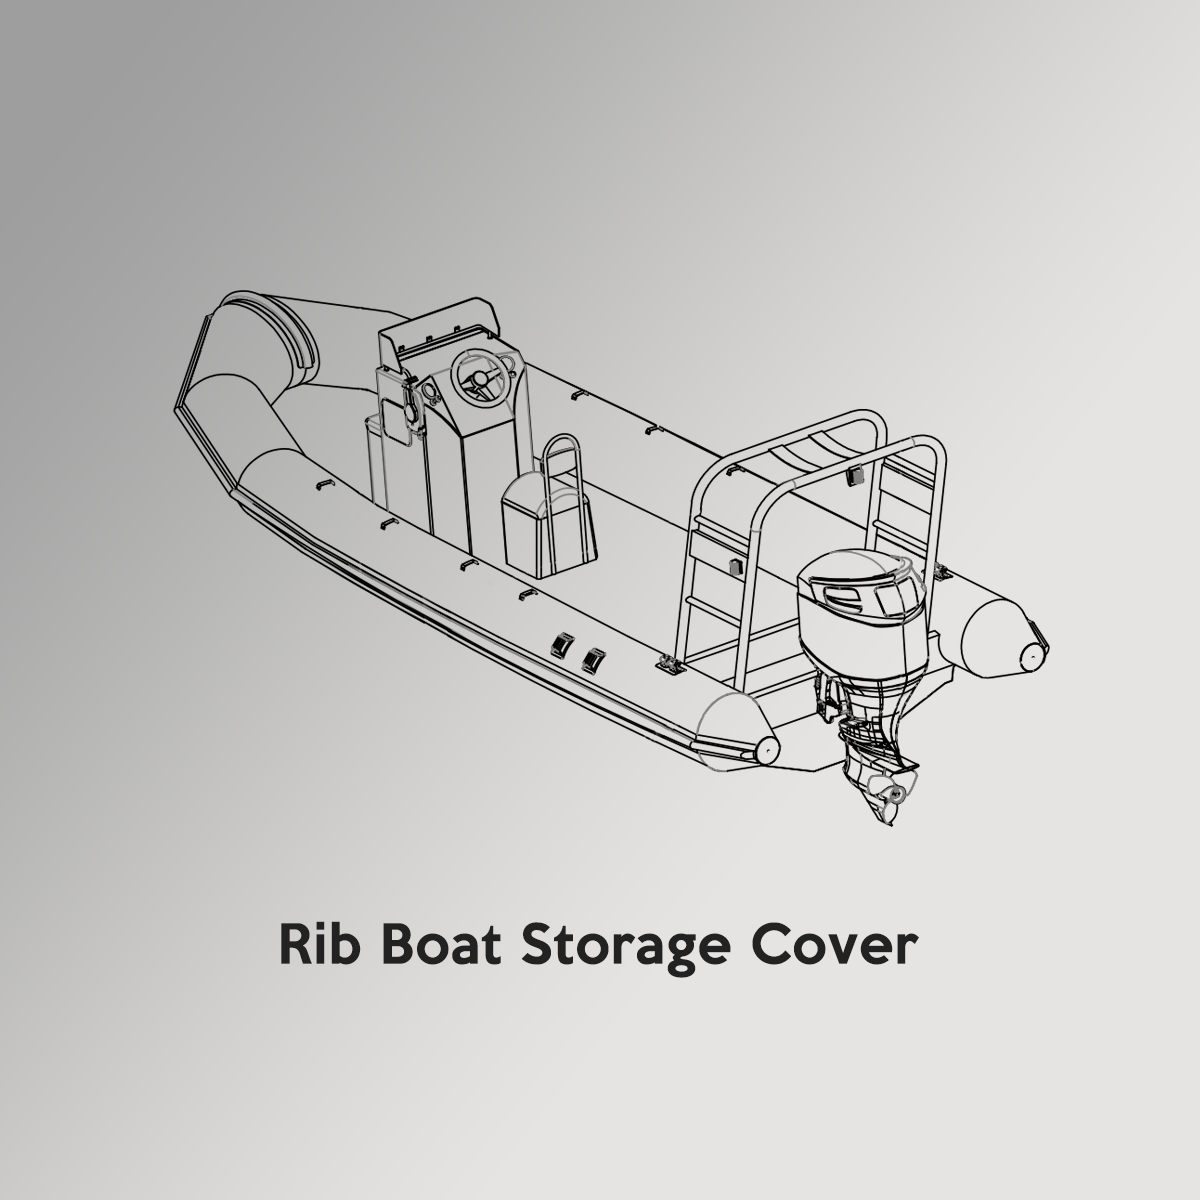 Rigid Hull Inflatable Boat Cover (Storage)